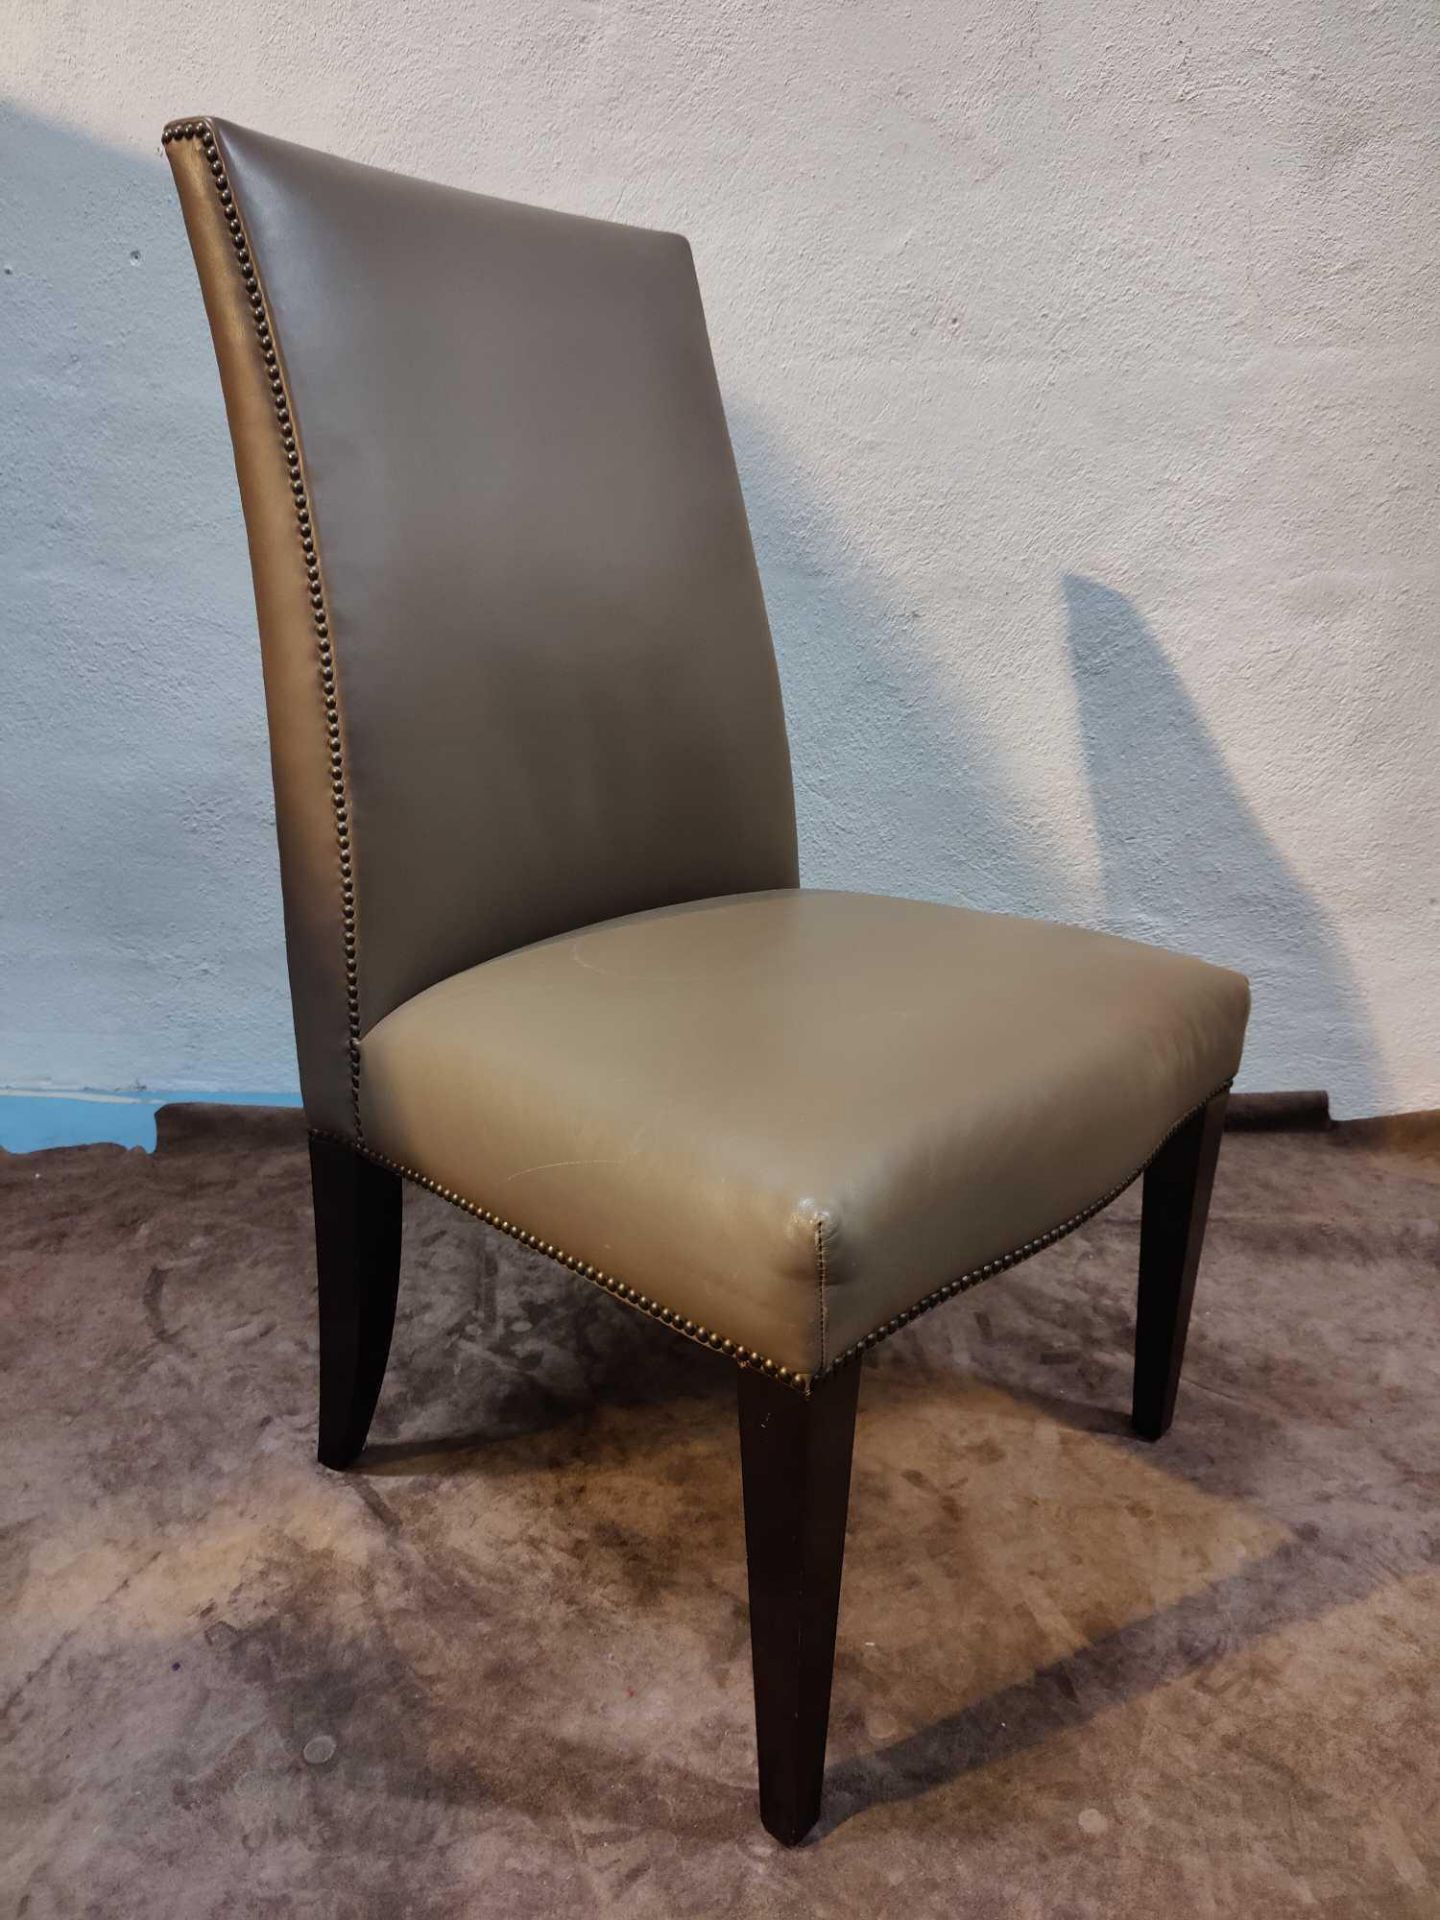 A Pair Of Leather Tall Back Side Chairs With Pin Detail Trimming 60 x 55 x 101cm - Image 3 of 3